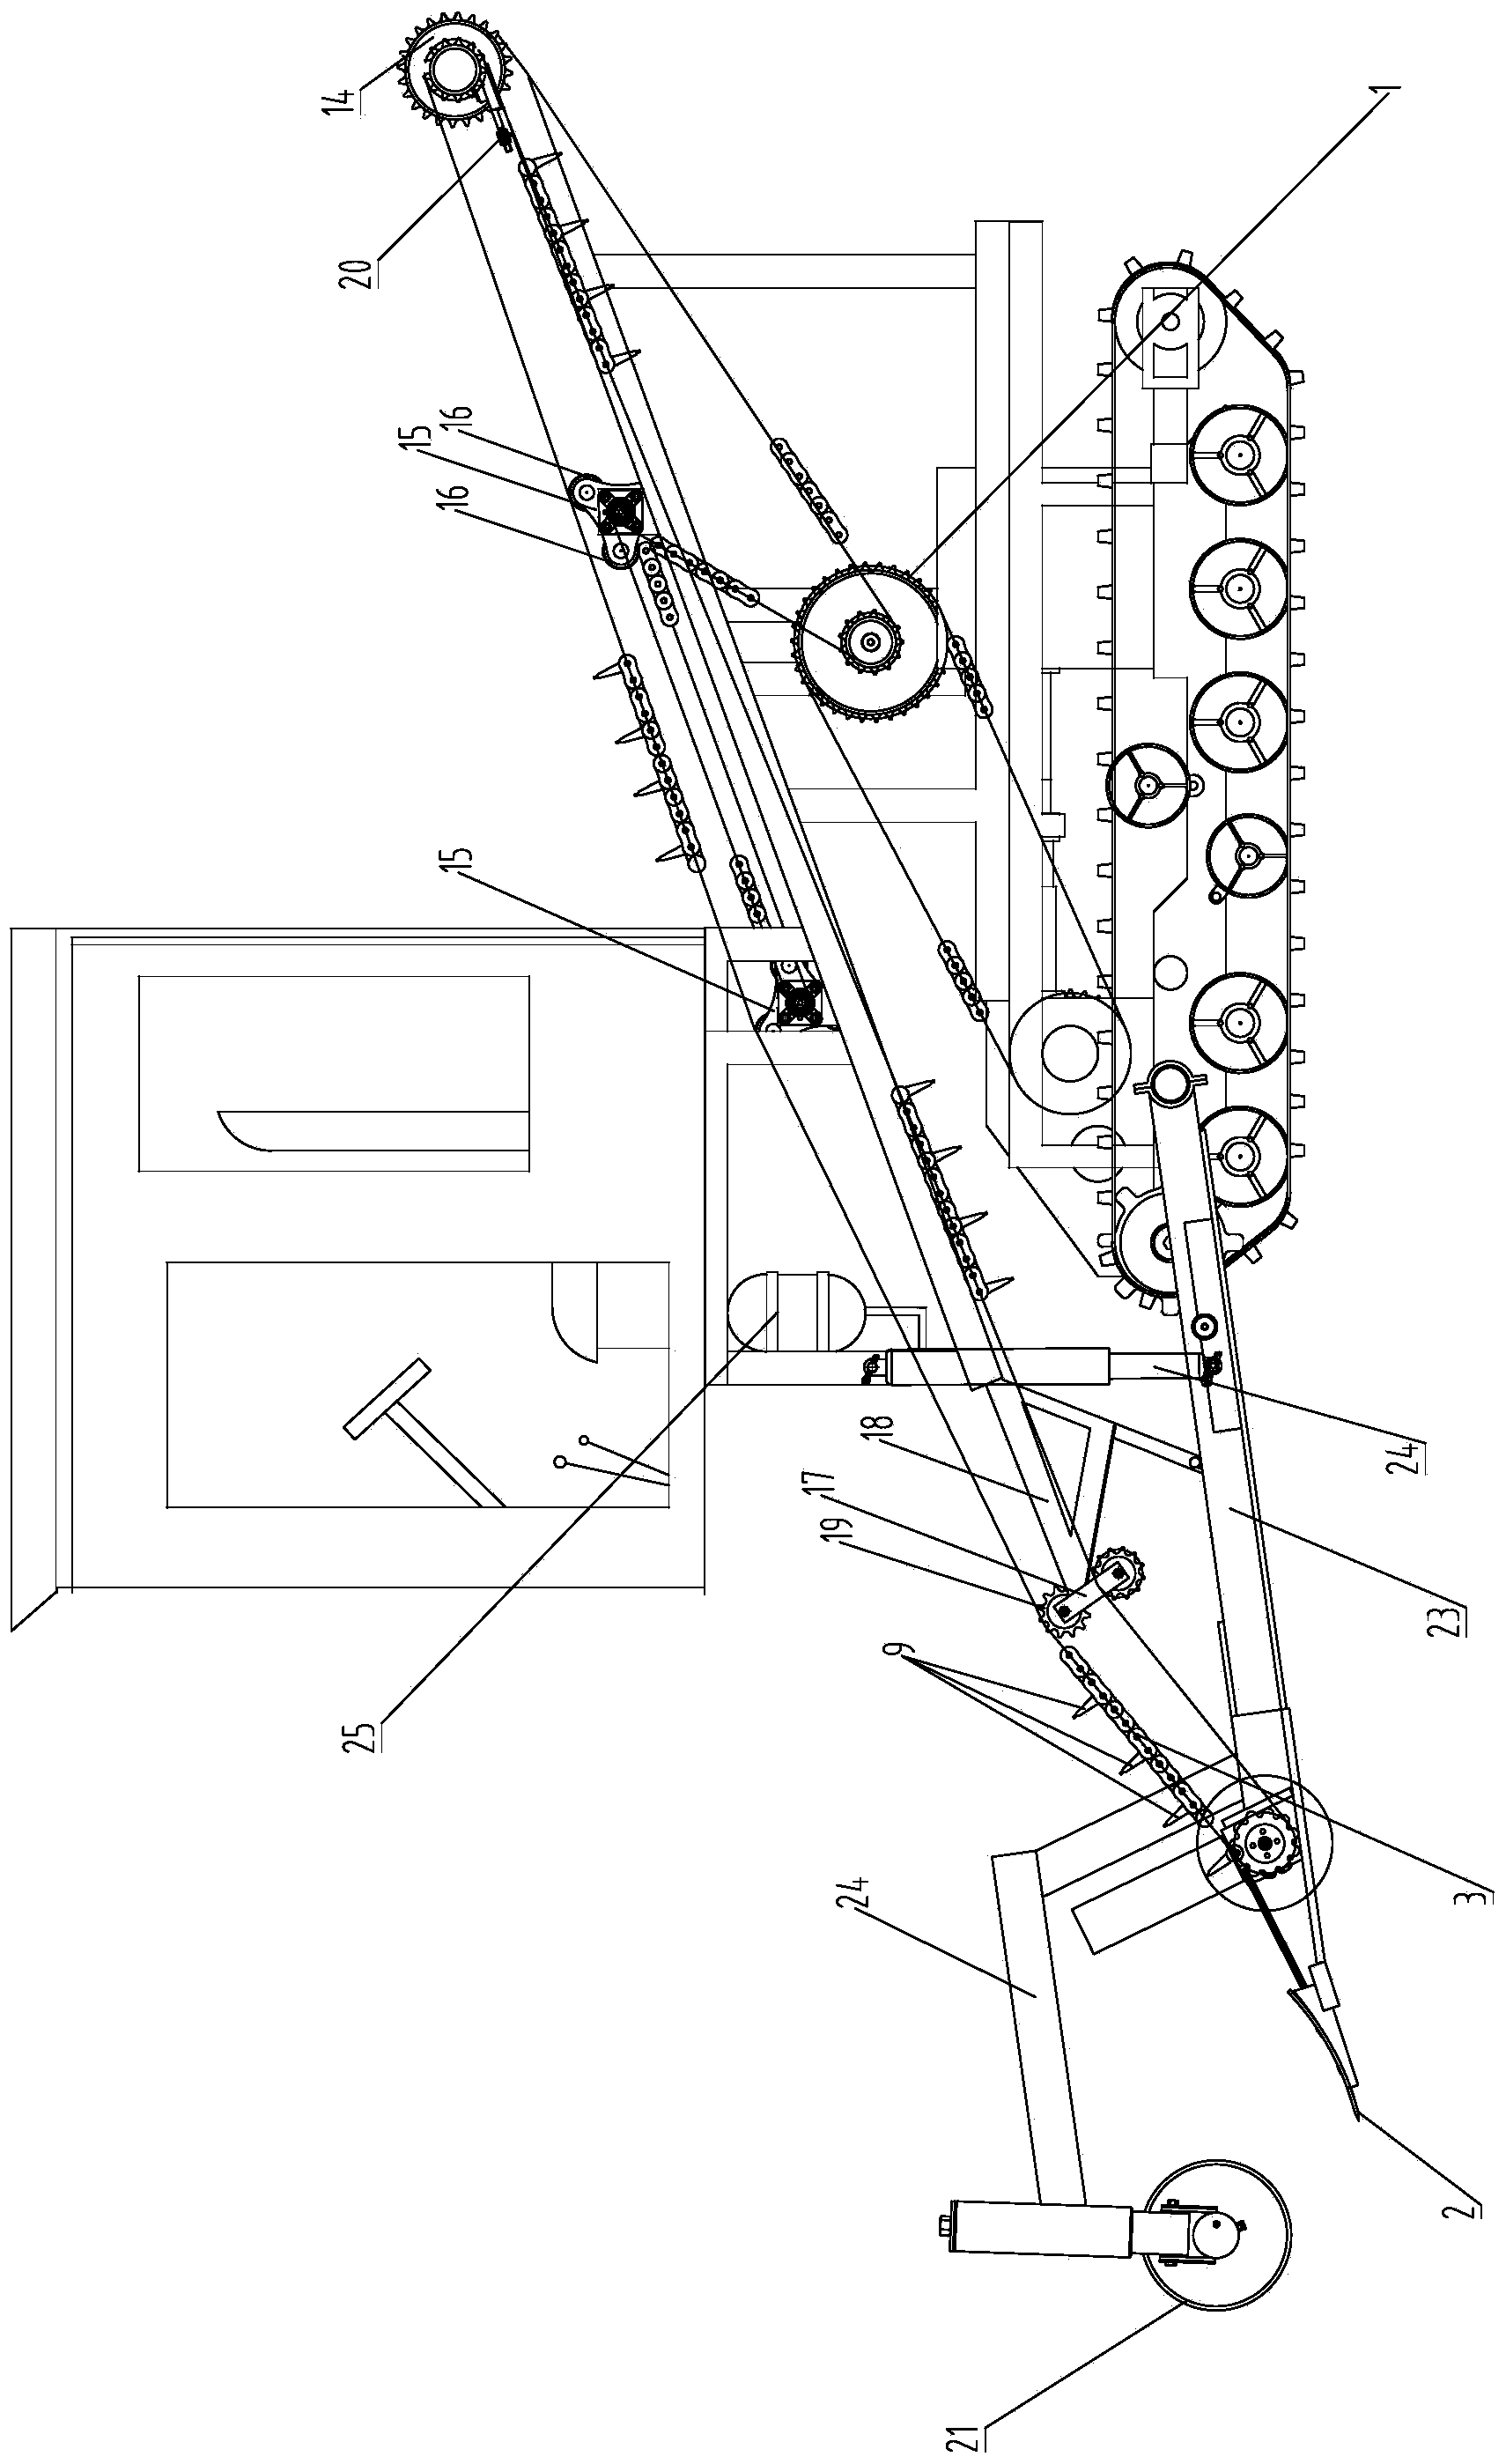 Flexible root crop separating device